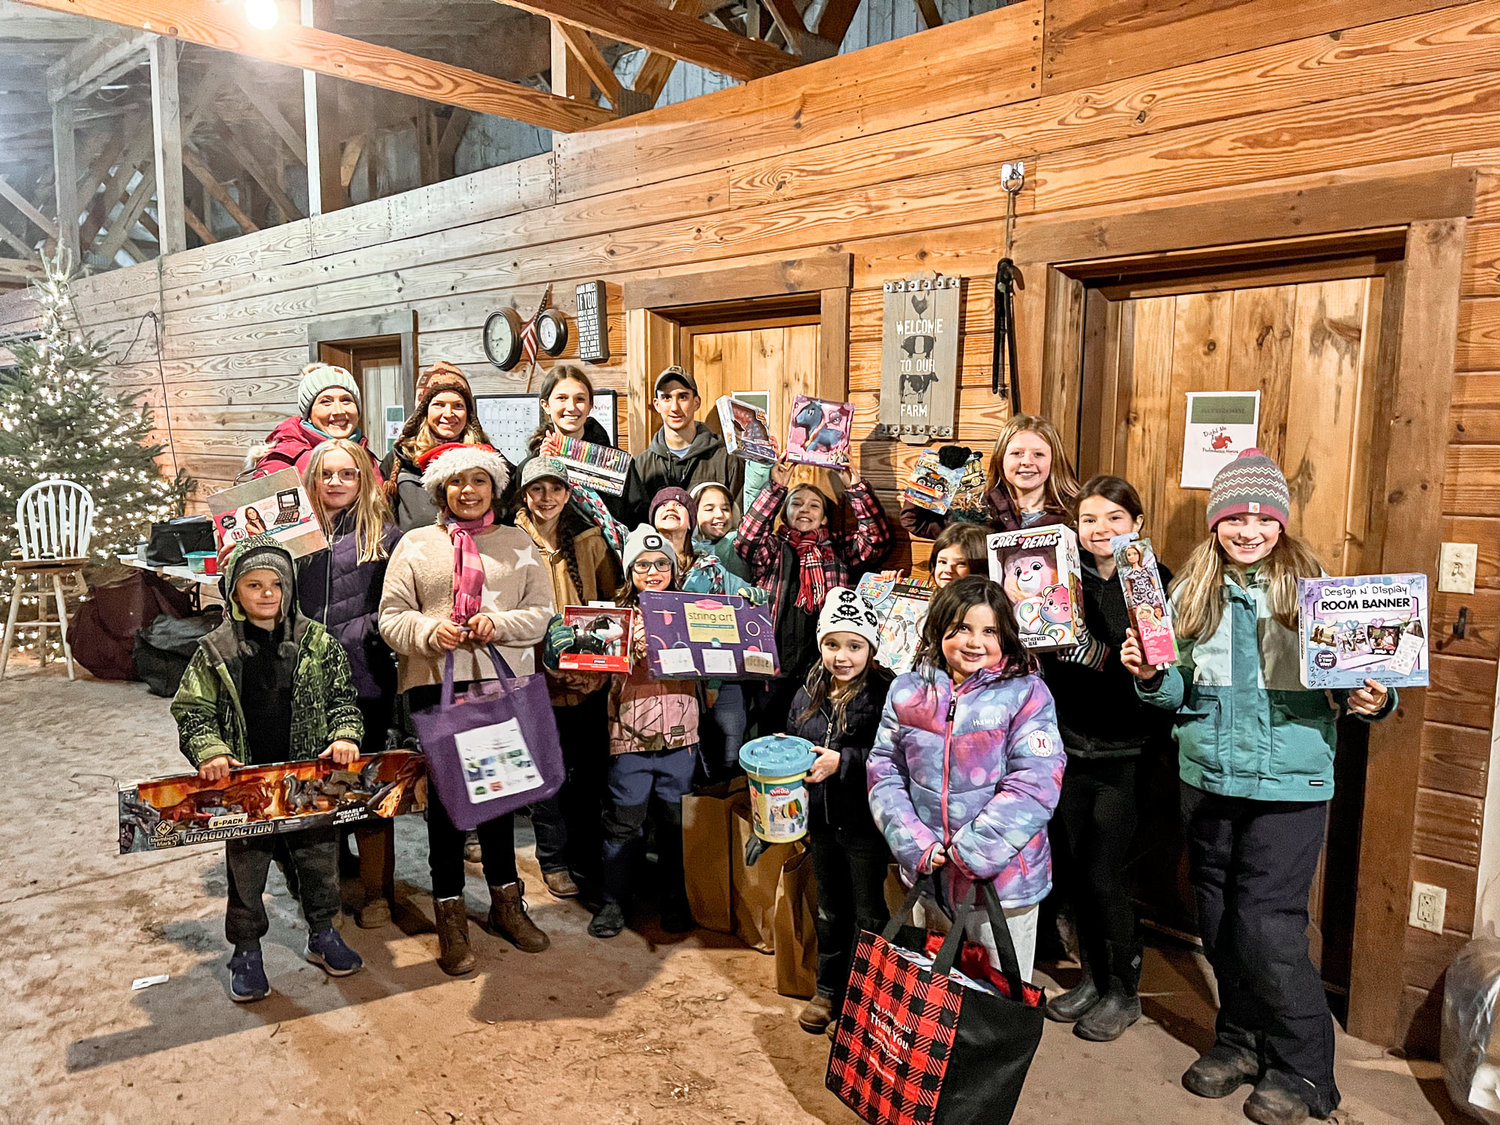 Local Diehl Me In 4-H group helps make the season bright for children in need with a toy drive this season.